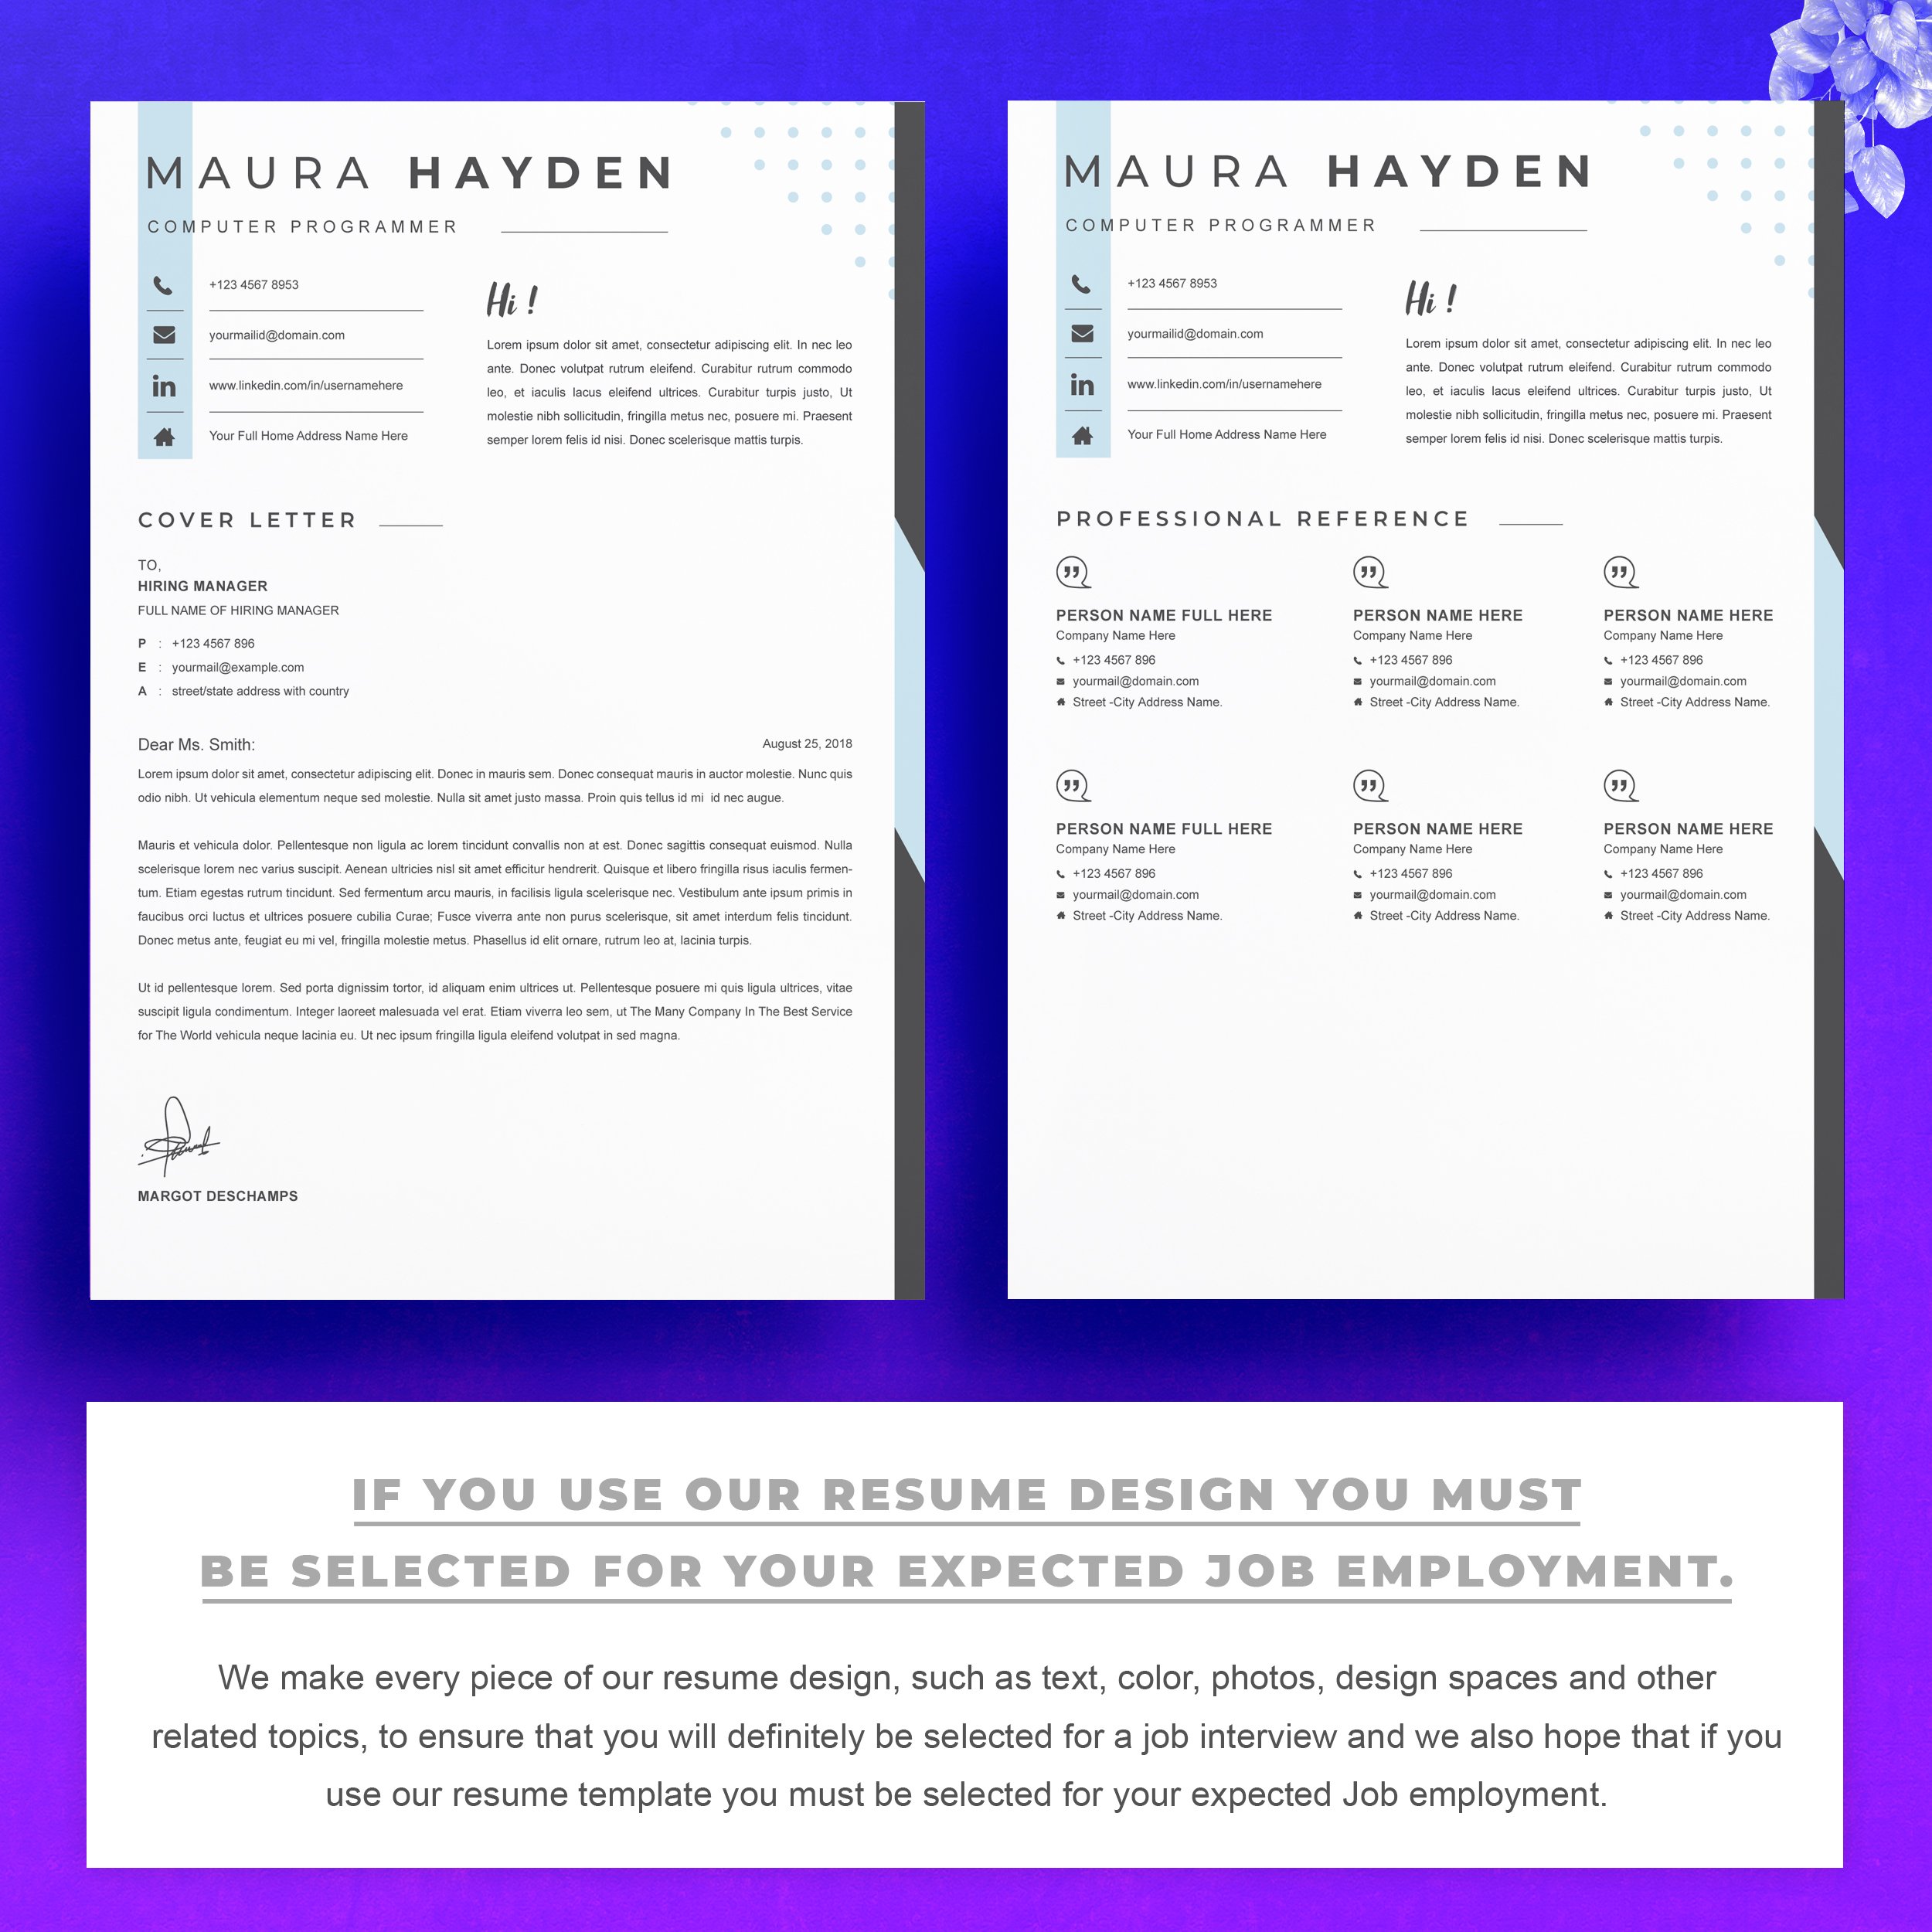 03 2 pages free resume design template copy 948